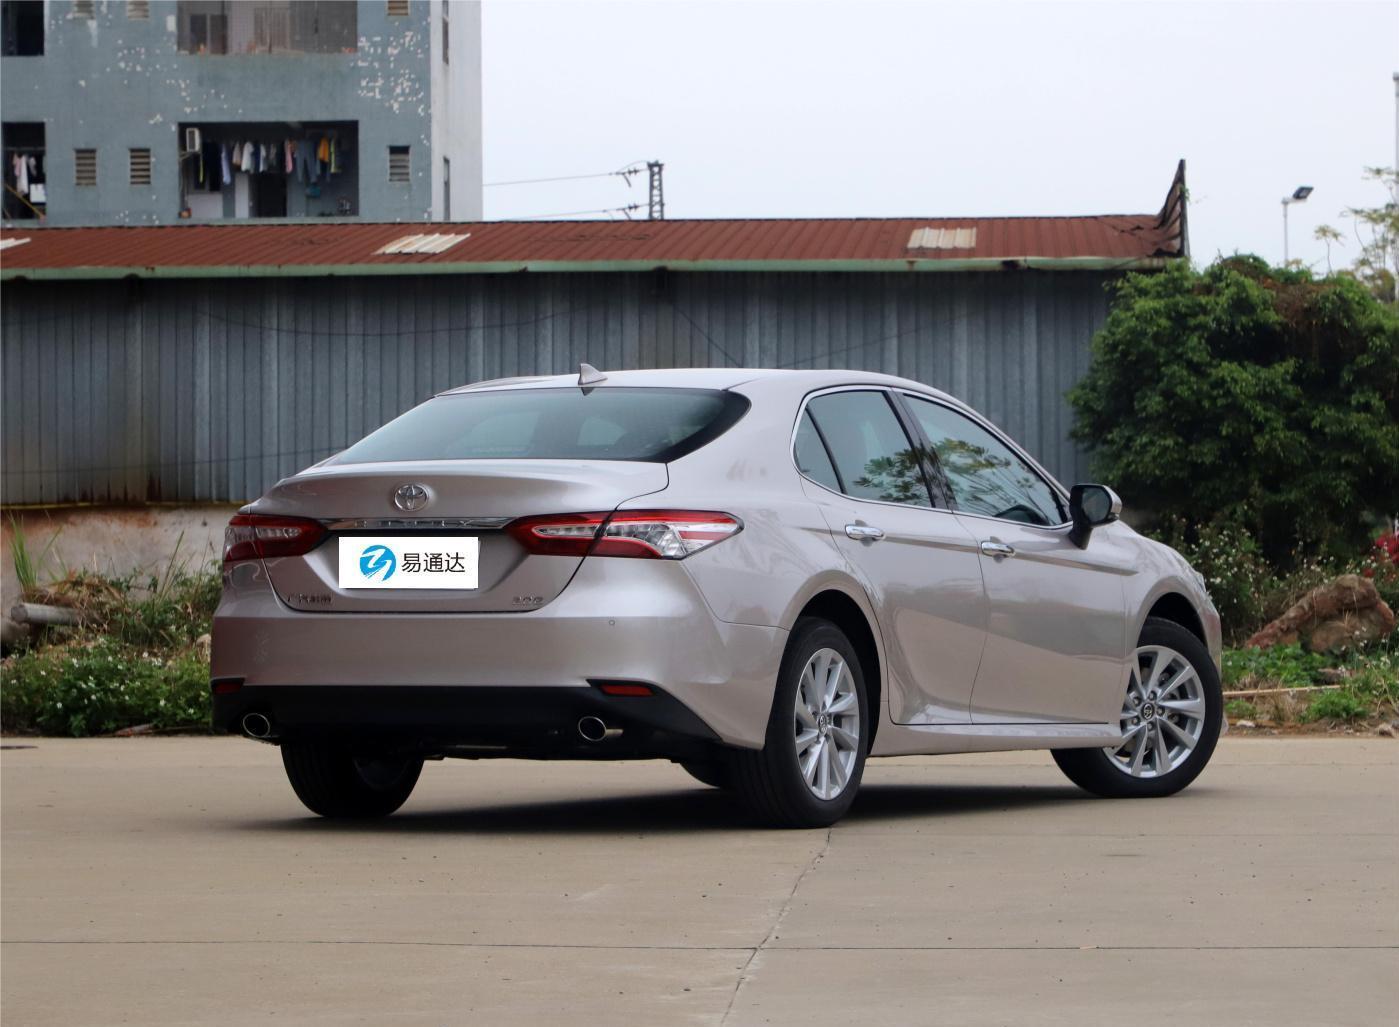 Toyota Camry electric vehicles Rear